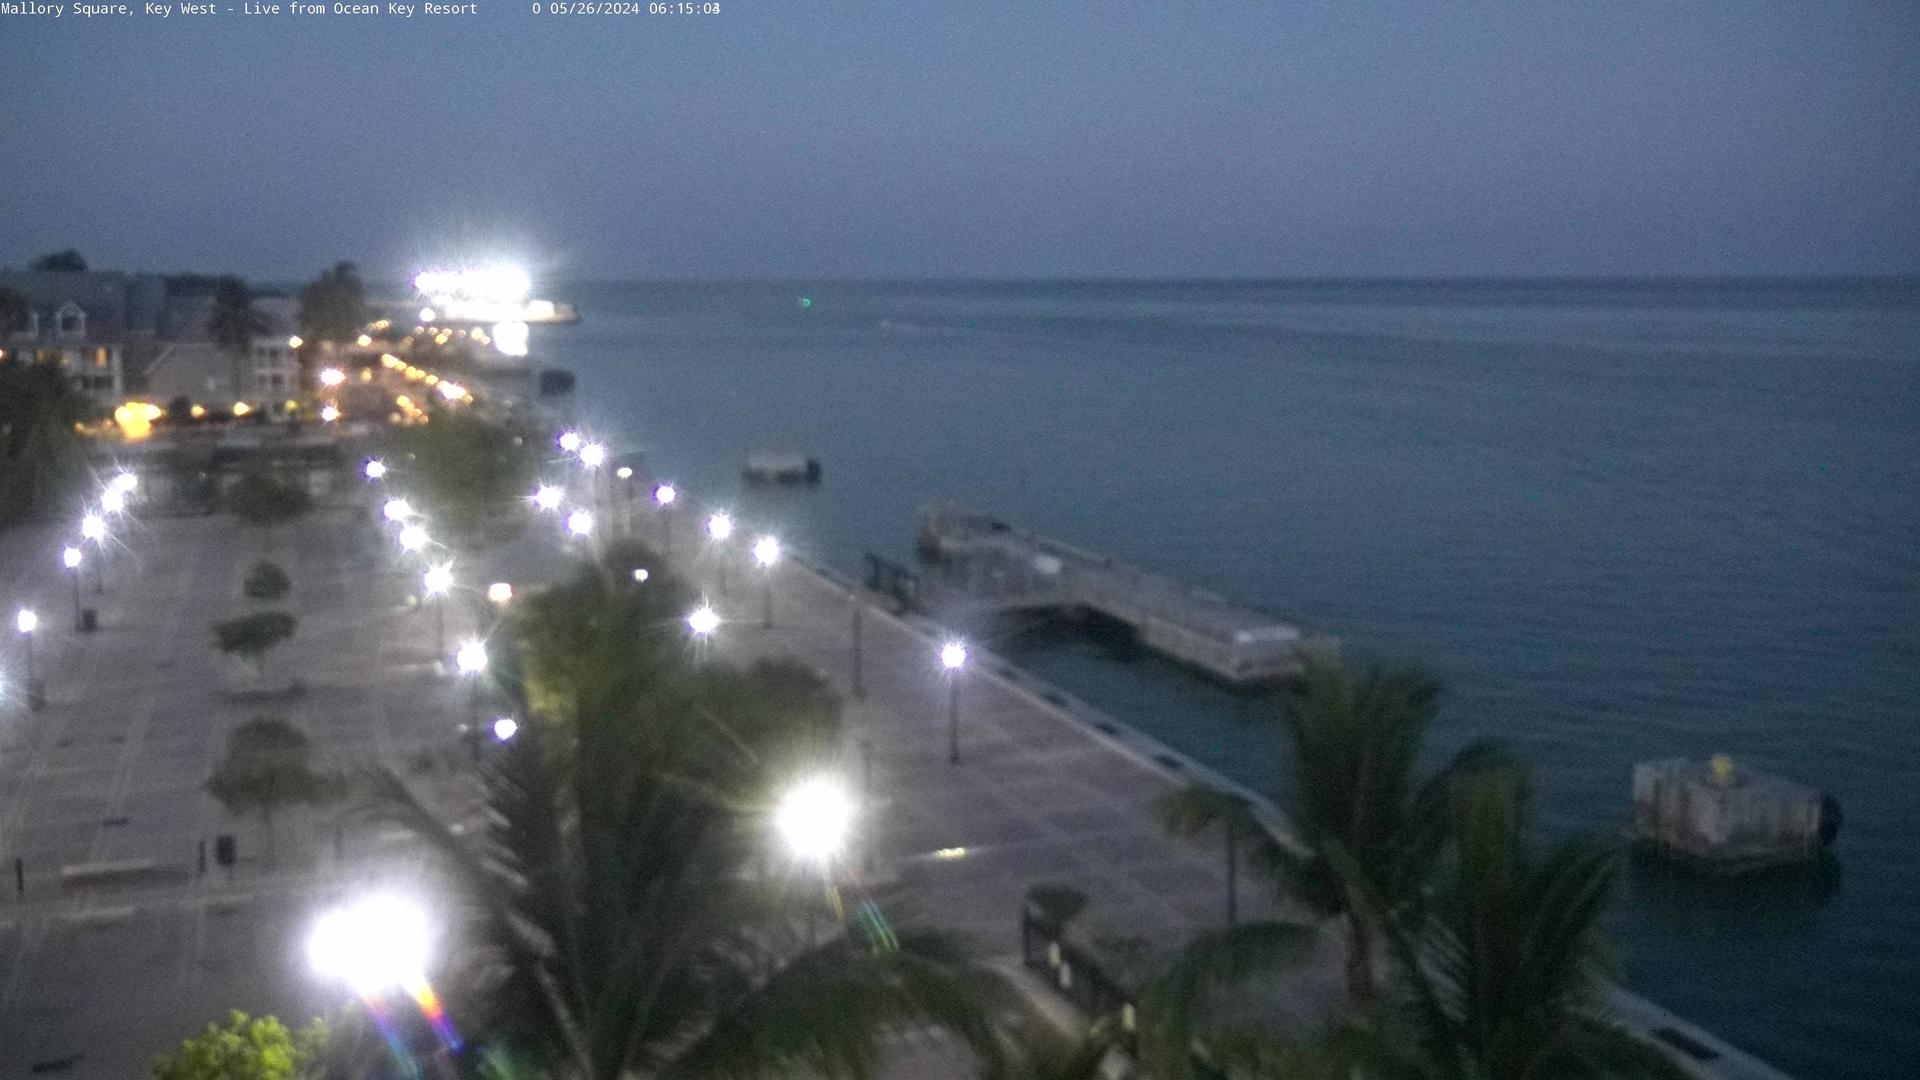 Traffic Cam Key West: Mallory square Player